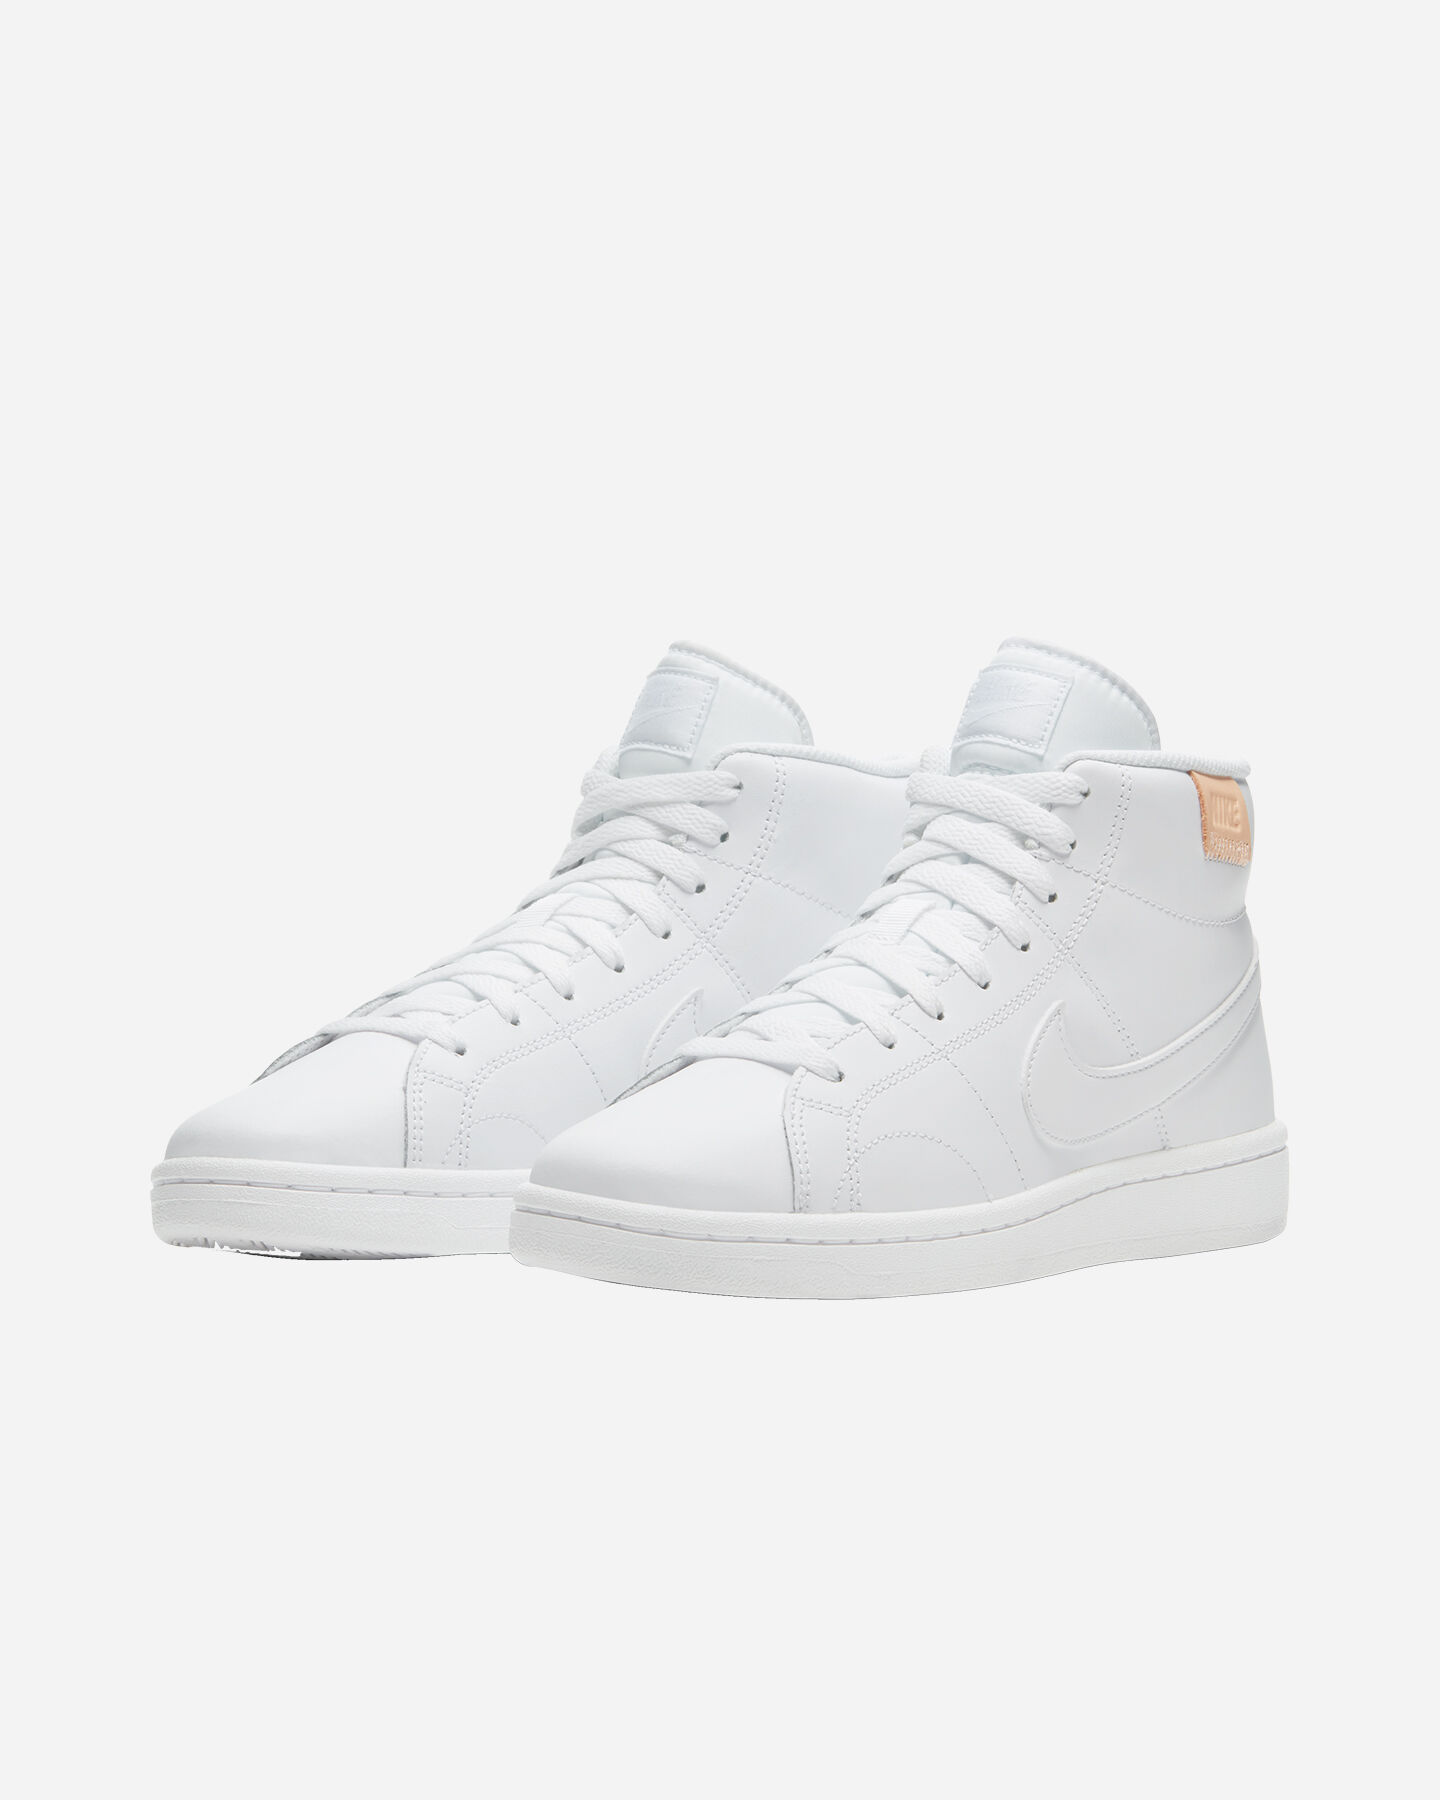  Scarpe sneakers NIKE COURT ROYALE 2 MID W S5248094|100|5 scatto 1